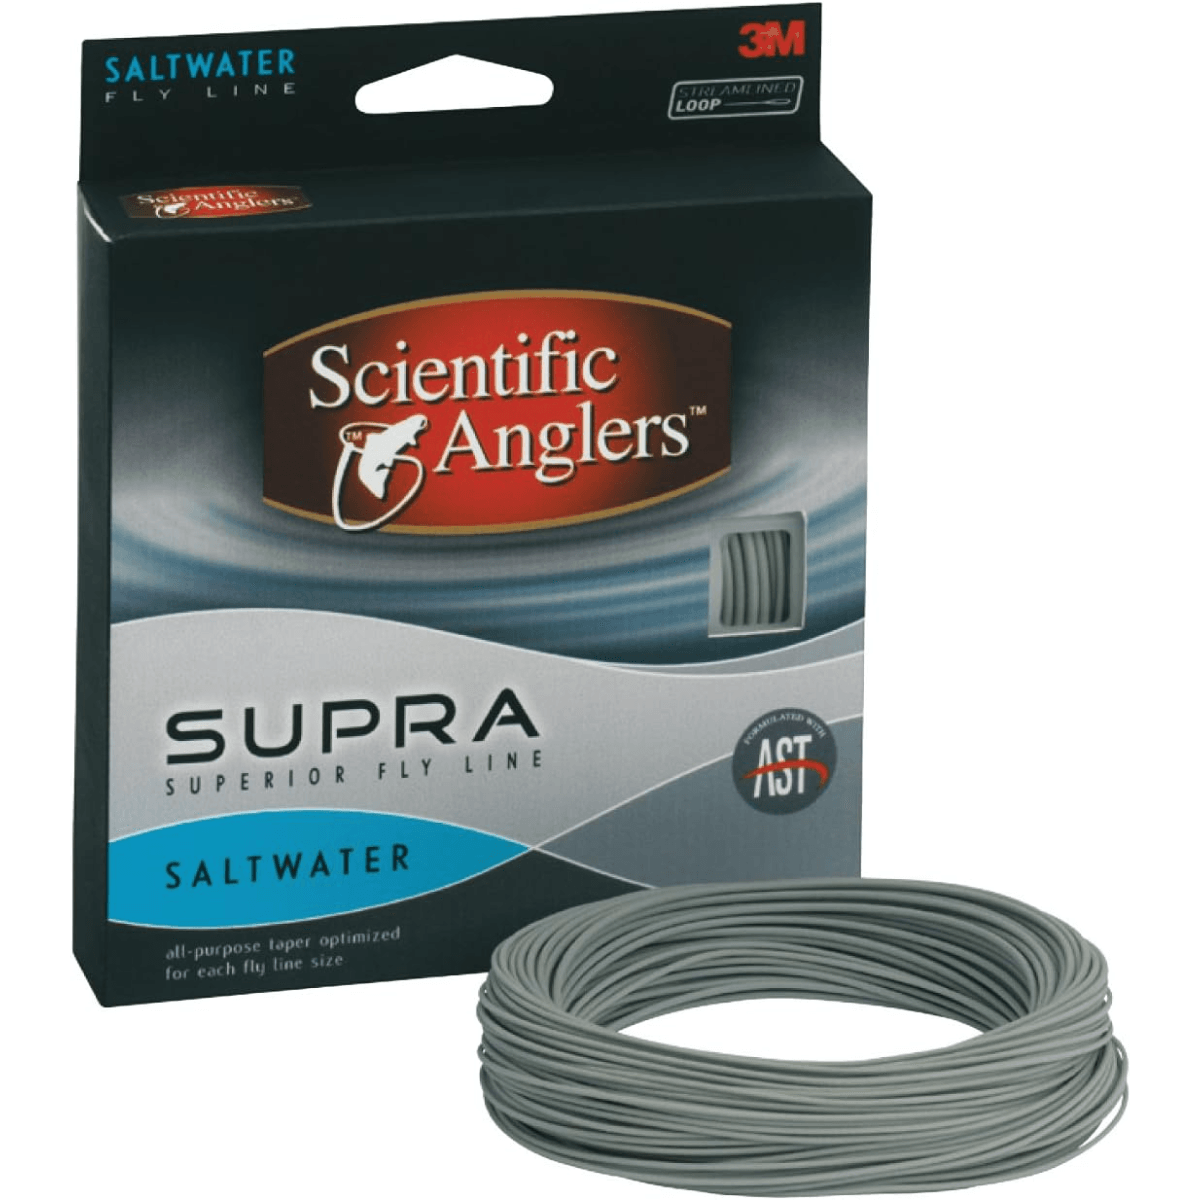 Scientific Anglers Supra Saltwater Fly Line